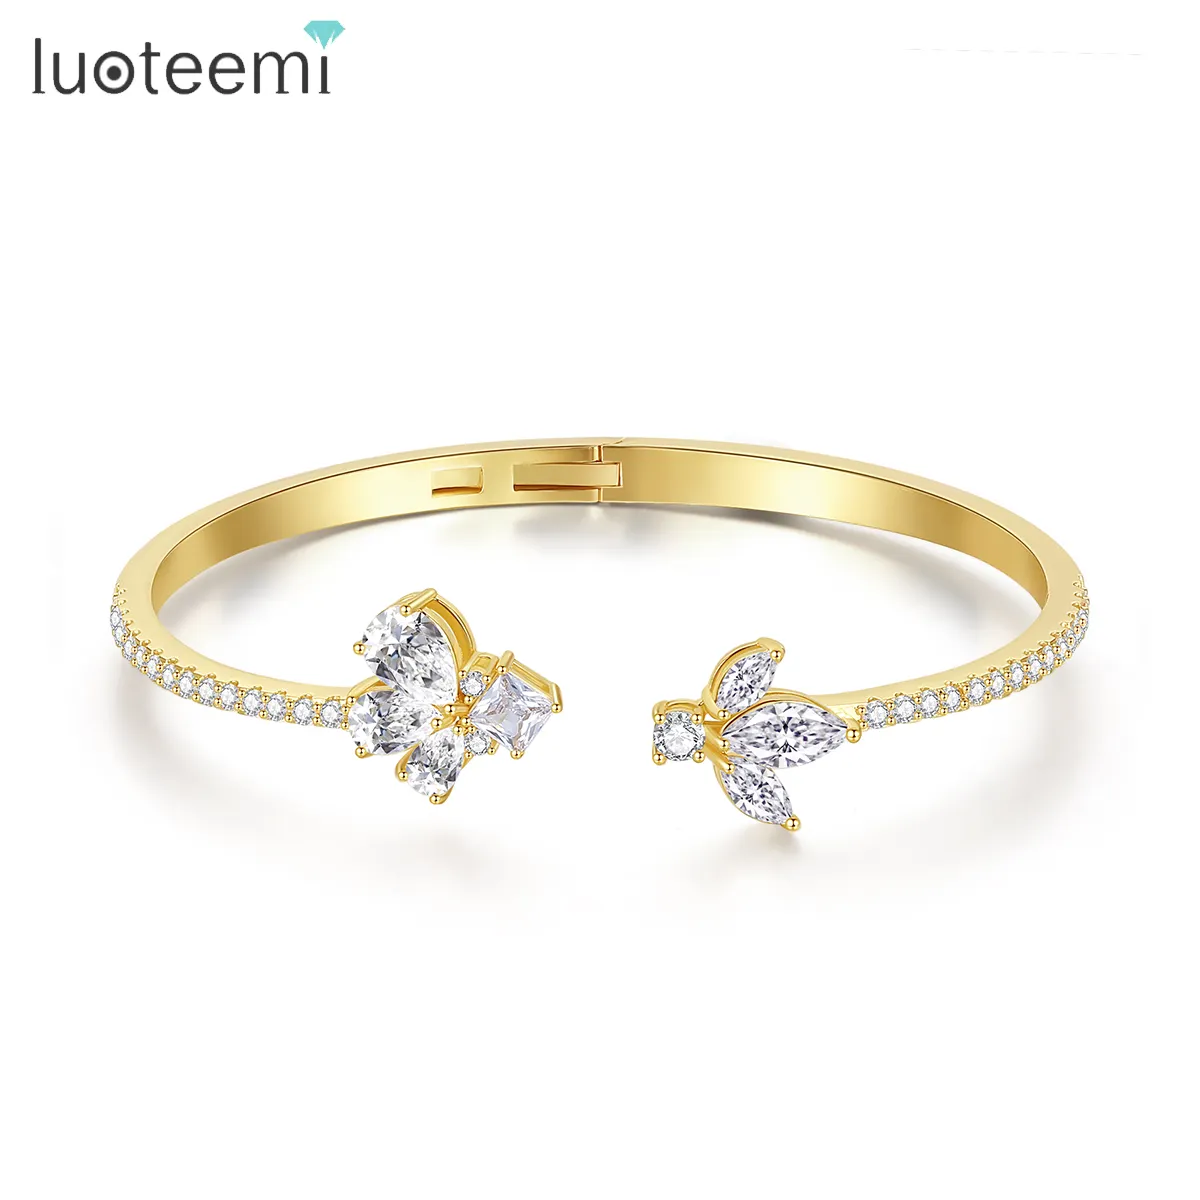 LUOTEEMI Woman Luxury Gold Plated Jewelry Chunky Adjustable Flower Cuff Charm Metal For Girl Open Bangle